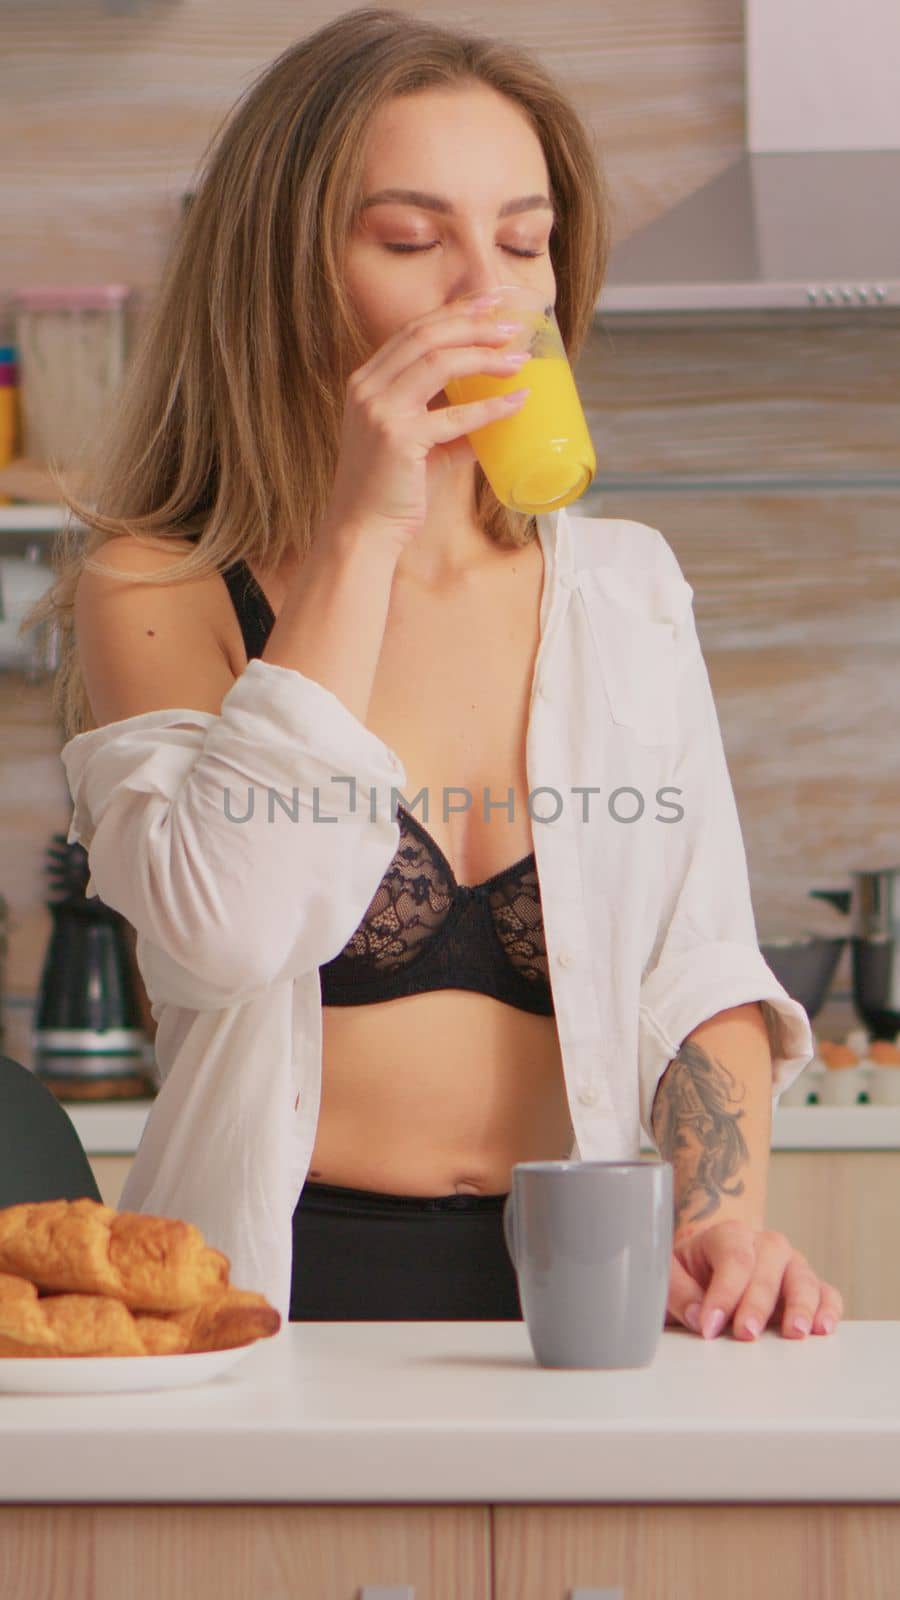 Seductive woman in sexy underwear enjoing the morning drinking a glass of fresh orange juice sitting in the kitchen. Young blode lady with tattoos wearing black lingerie refreshing sunday morning